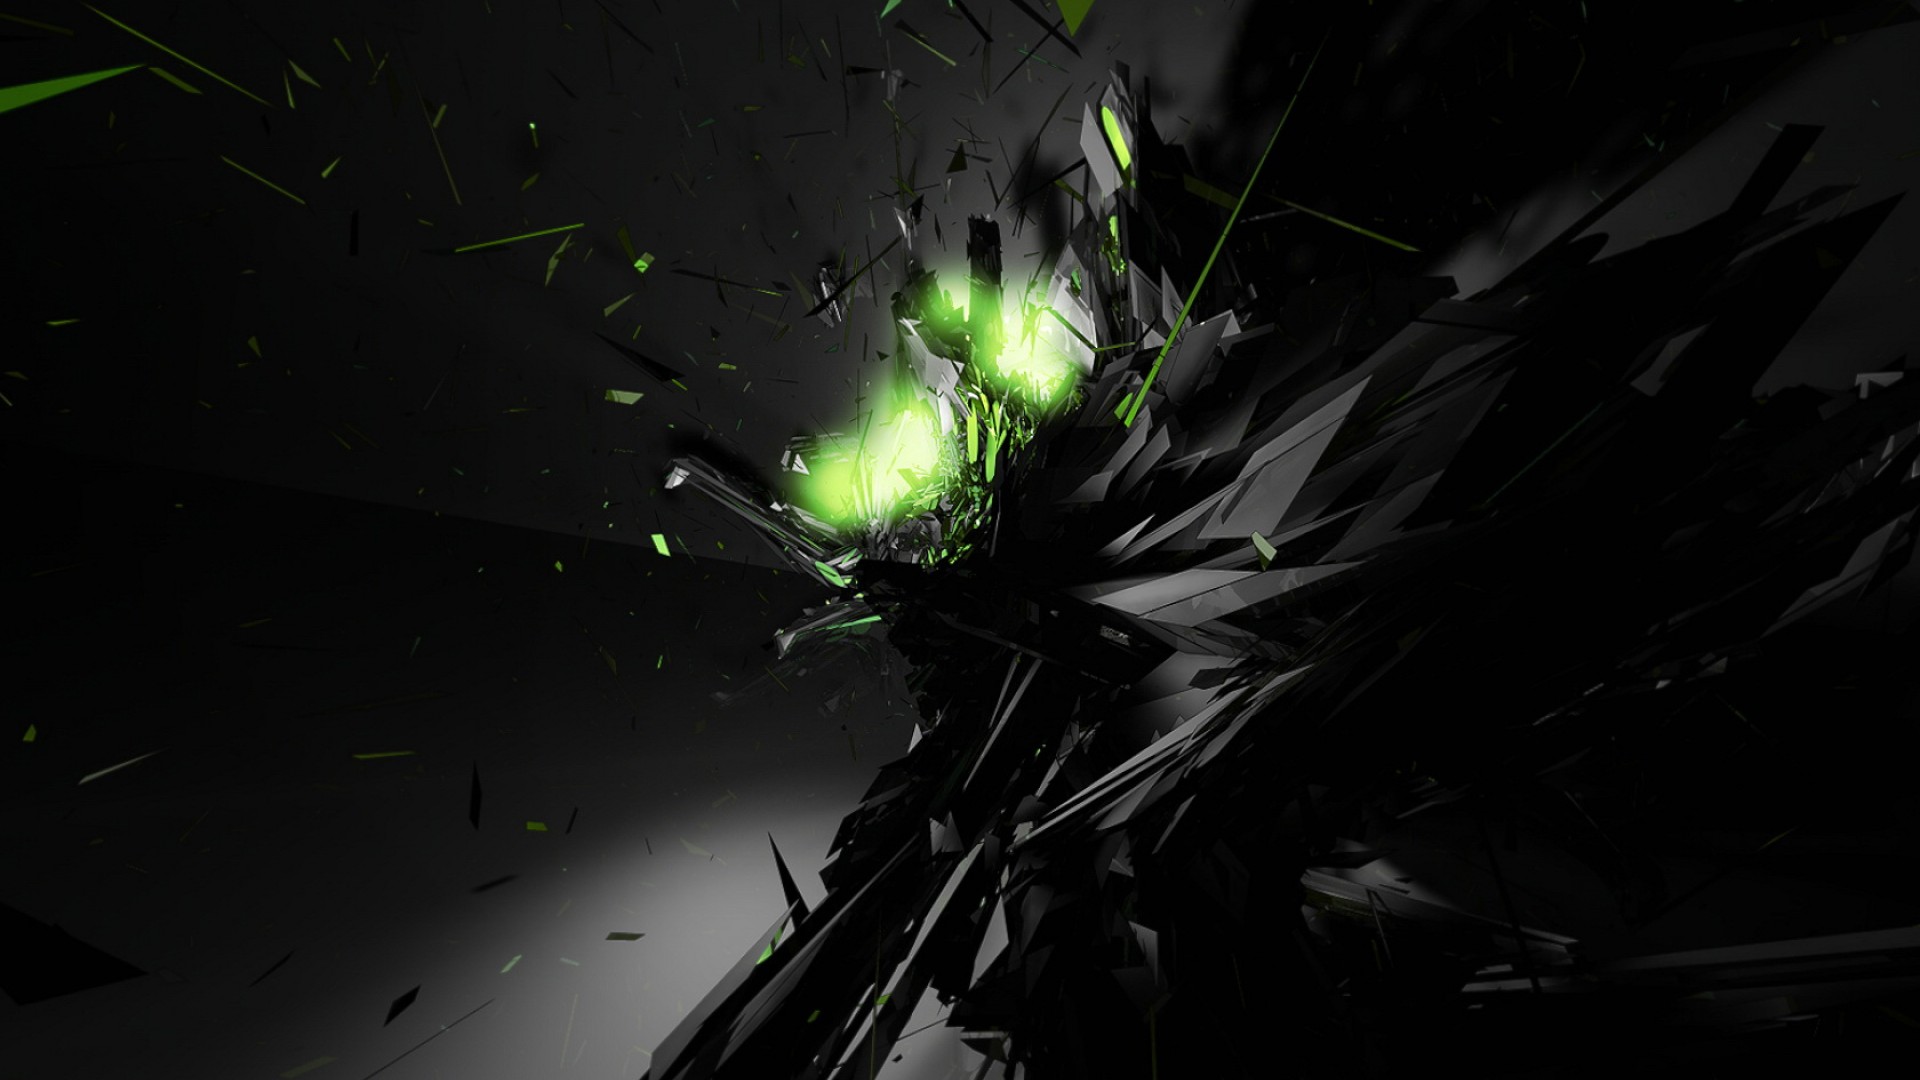  Abstract Green Glow Desktop Wallpaper and make this wallpaper for your